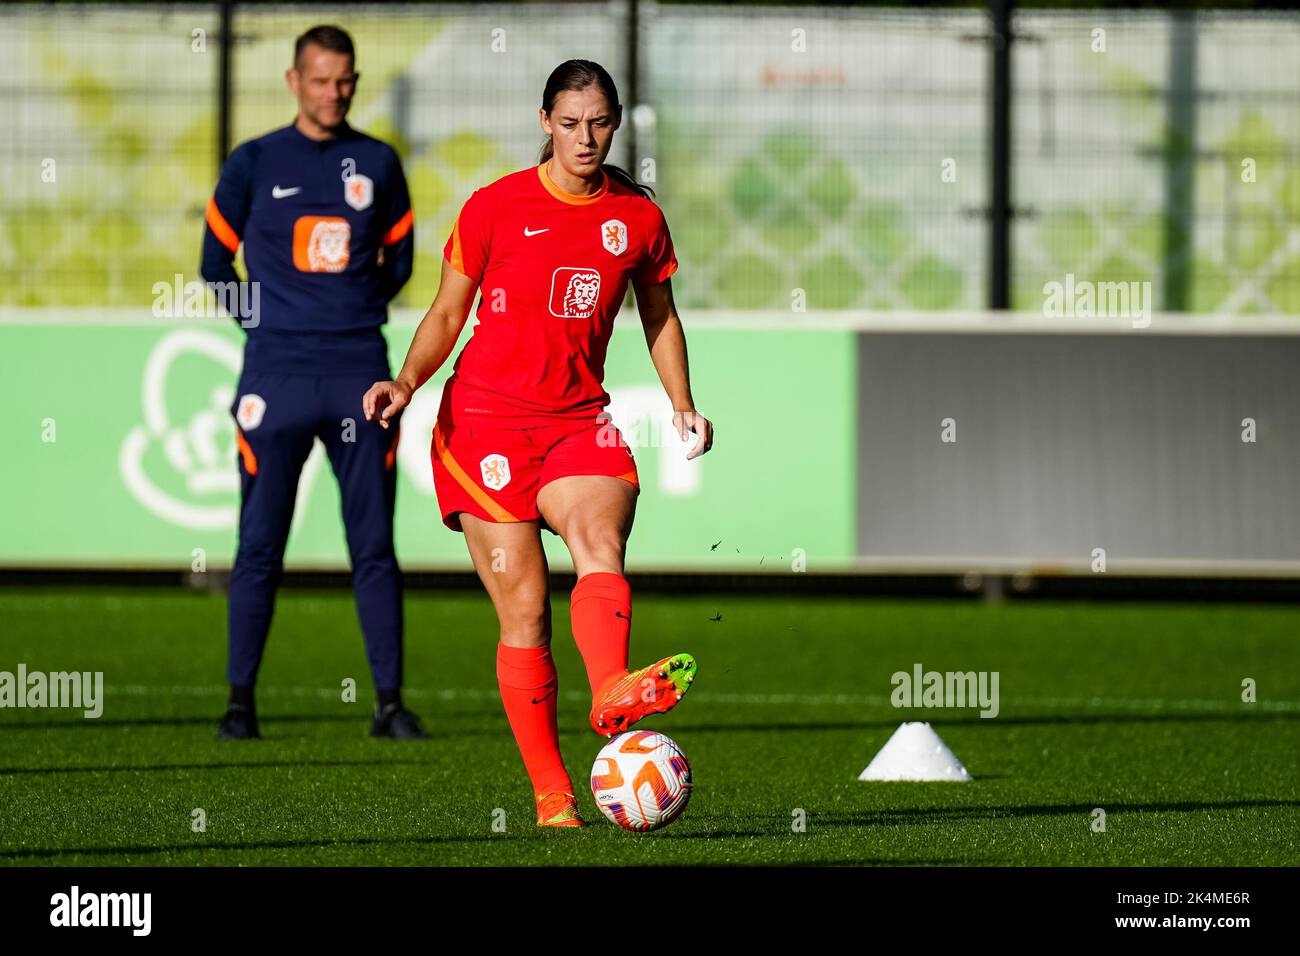 ZEIST, NETHERLANDS - OCTOBER 3: Aniek Nouwen of the Netherlands during a Training Session of the Netherlands Women’s Football Team at the KNVB Campus on October 3, 2022 in Zeist, Netherlands (Photo by Joris Verwijst/Orange Pictures) Stock Photo